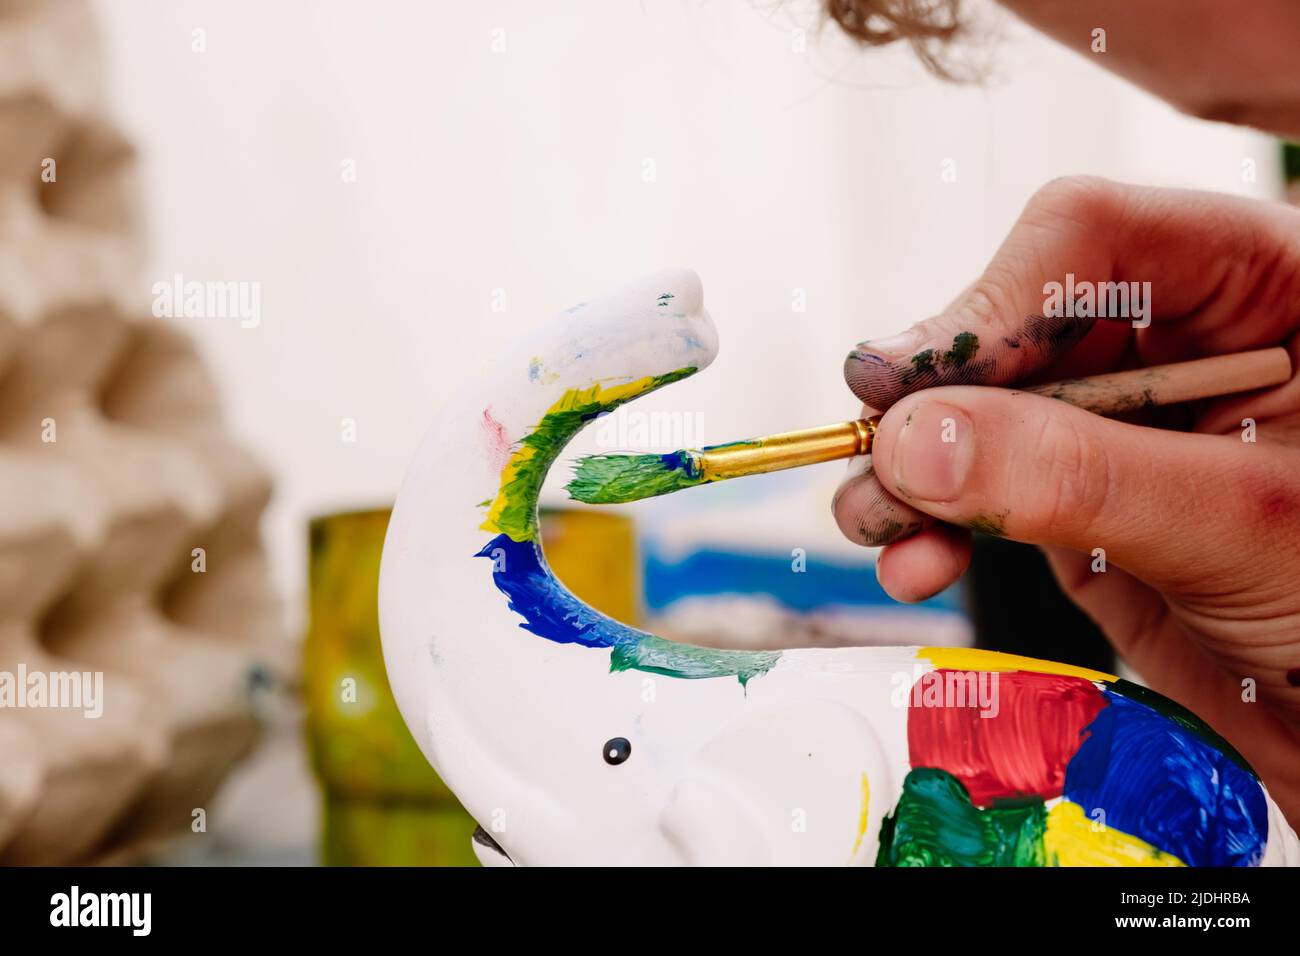 Child plays to unleash his creativity by decorating a white plaster figure with colored paints, during the summer holidays. Stock Photo